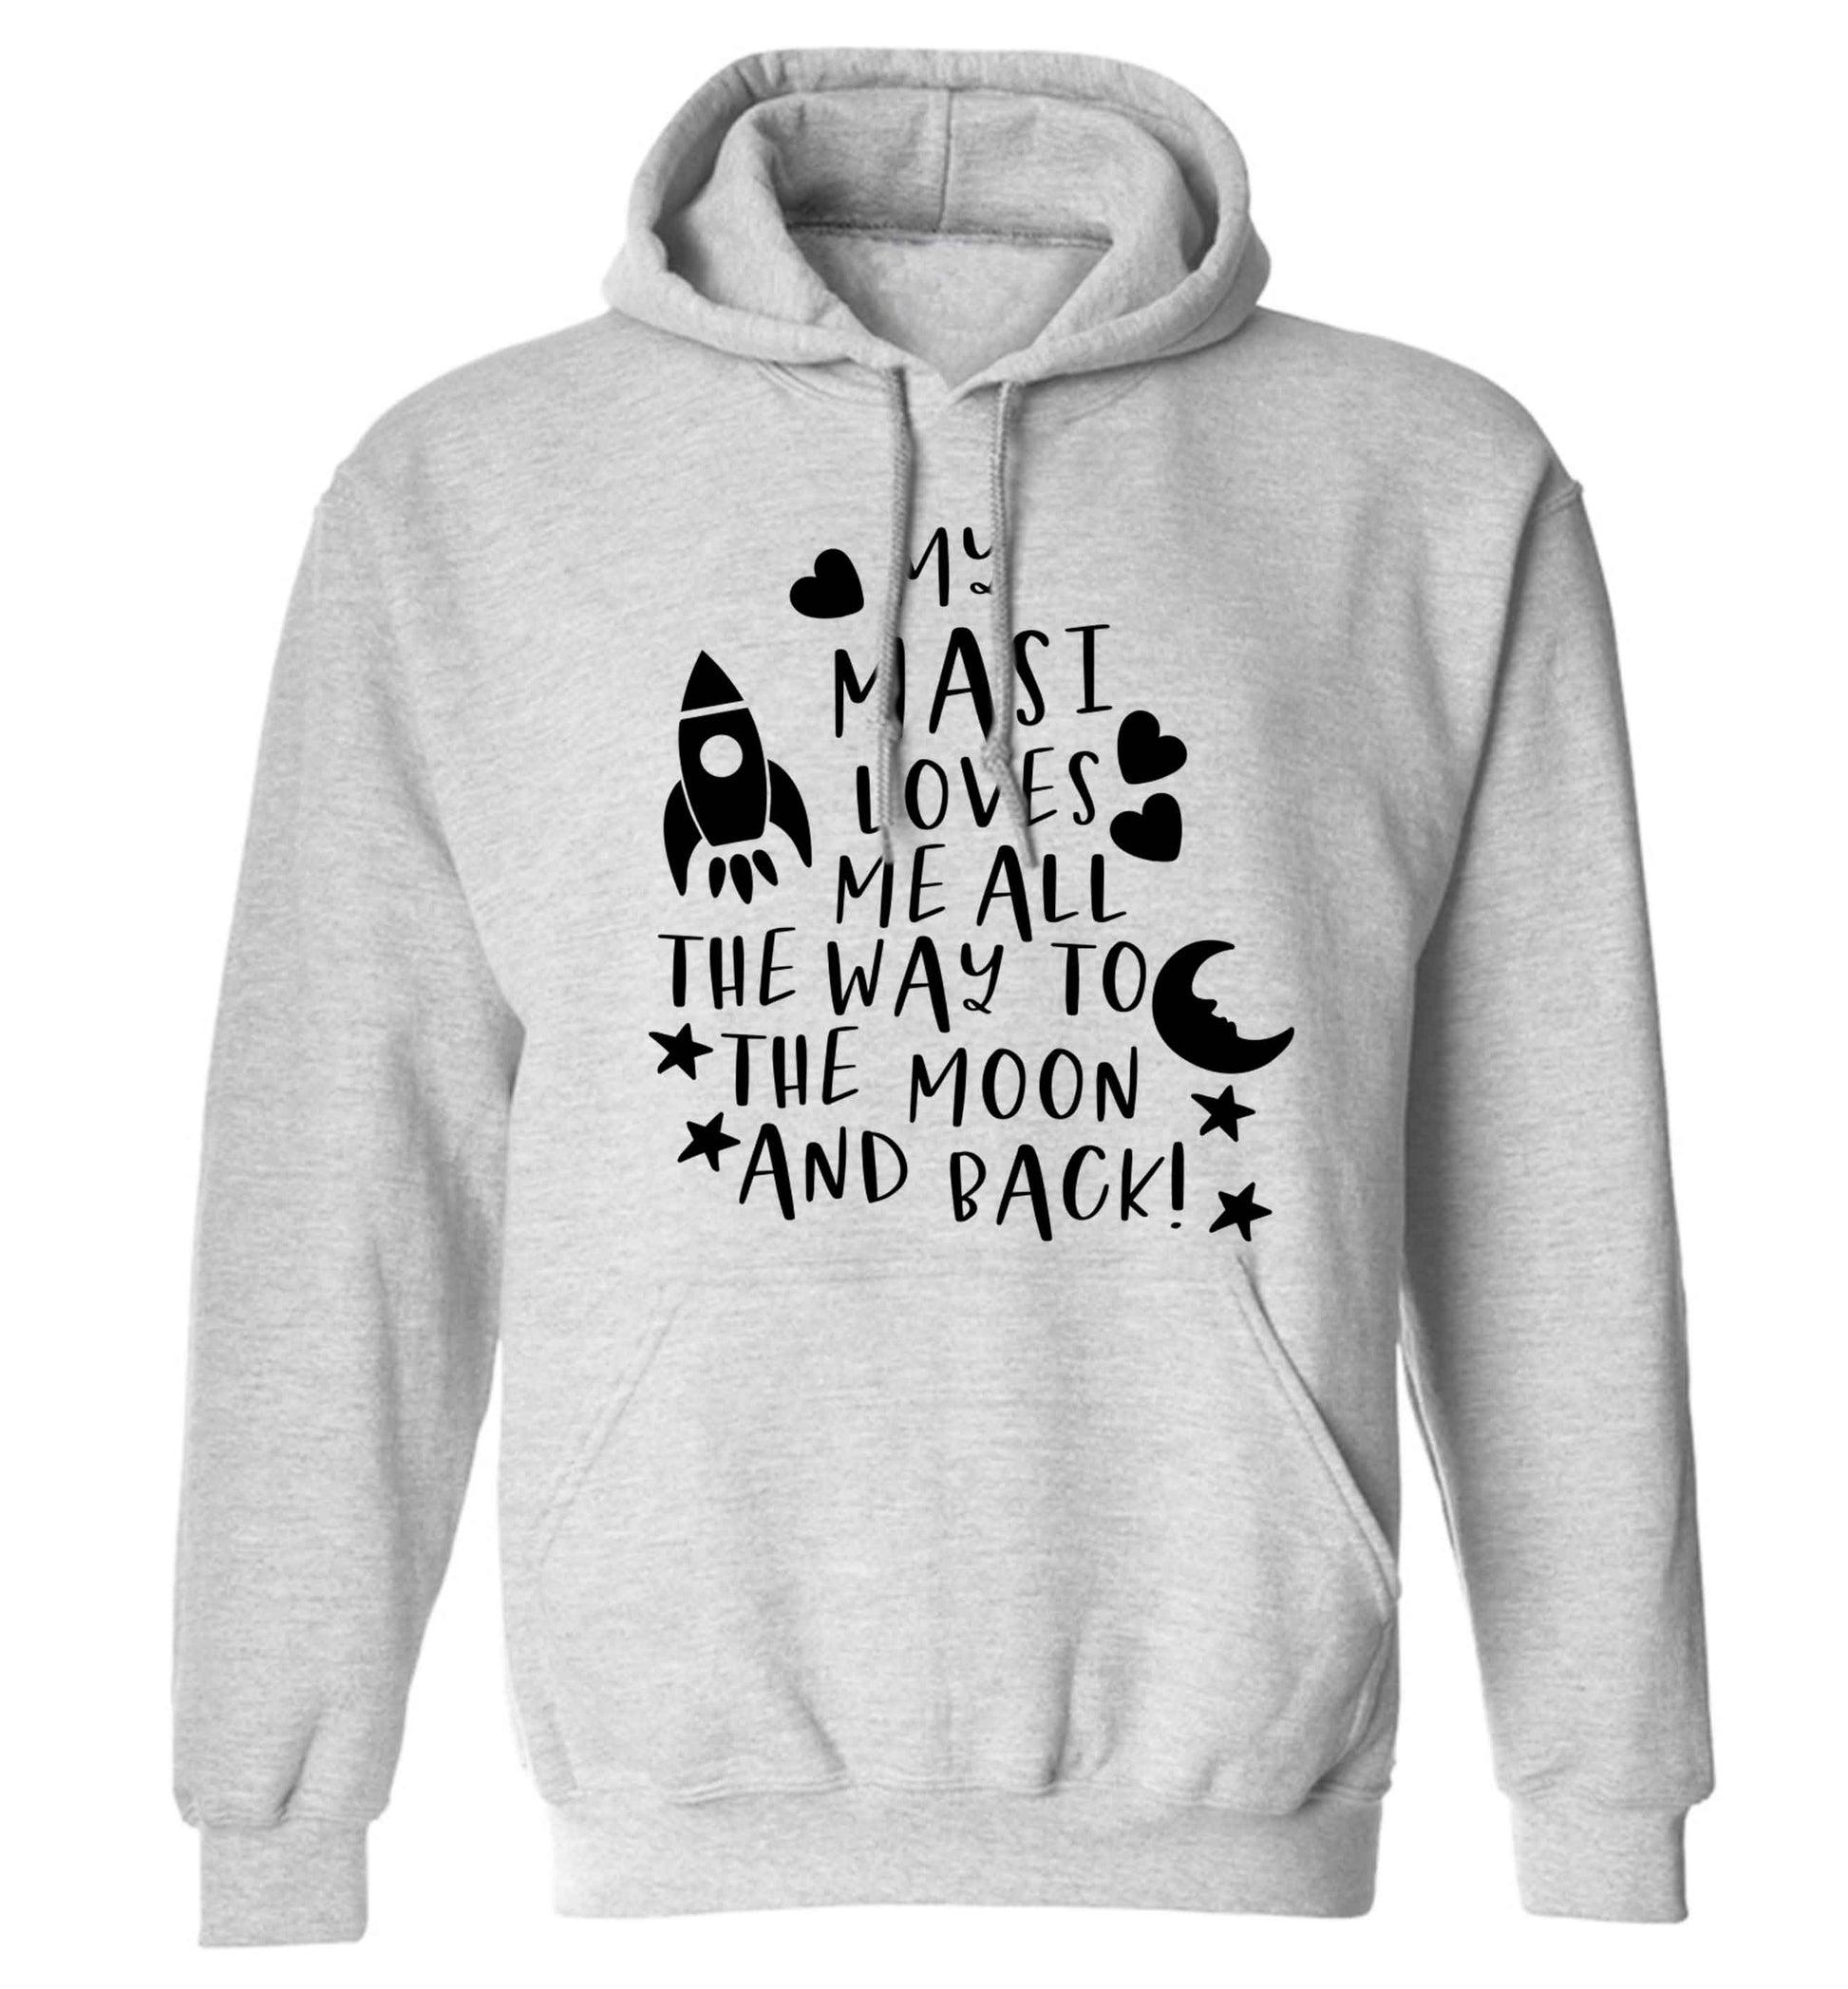 My masi loves me all the way to the moon and back adults unisex grey hoodie 2XL